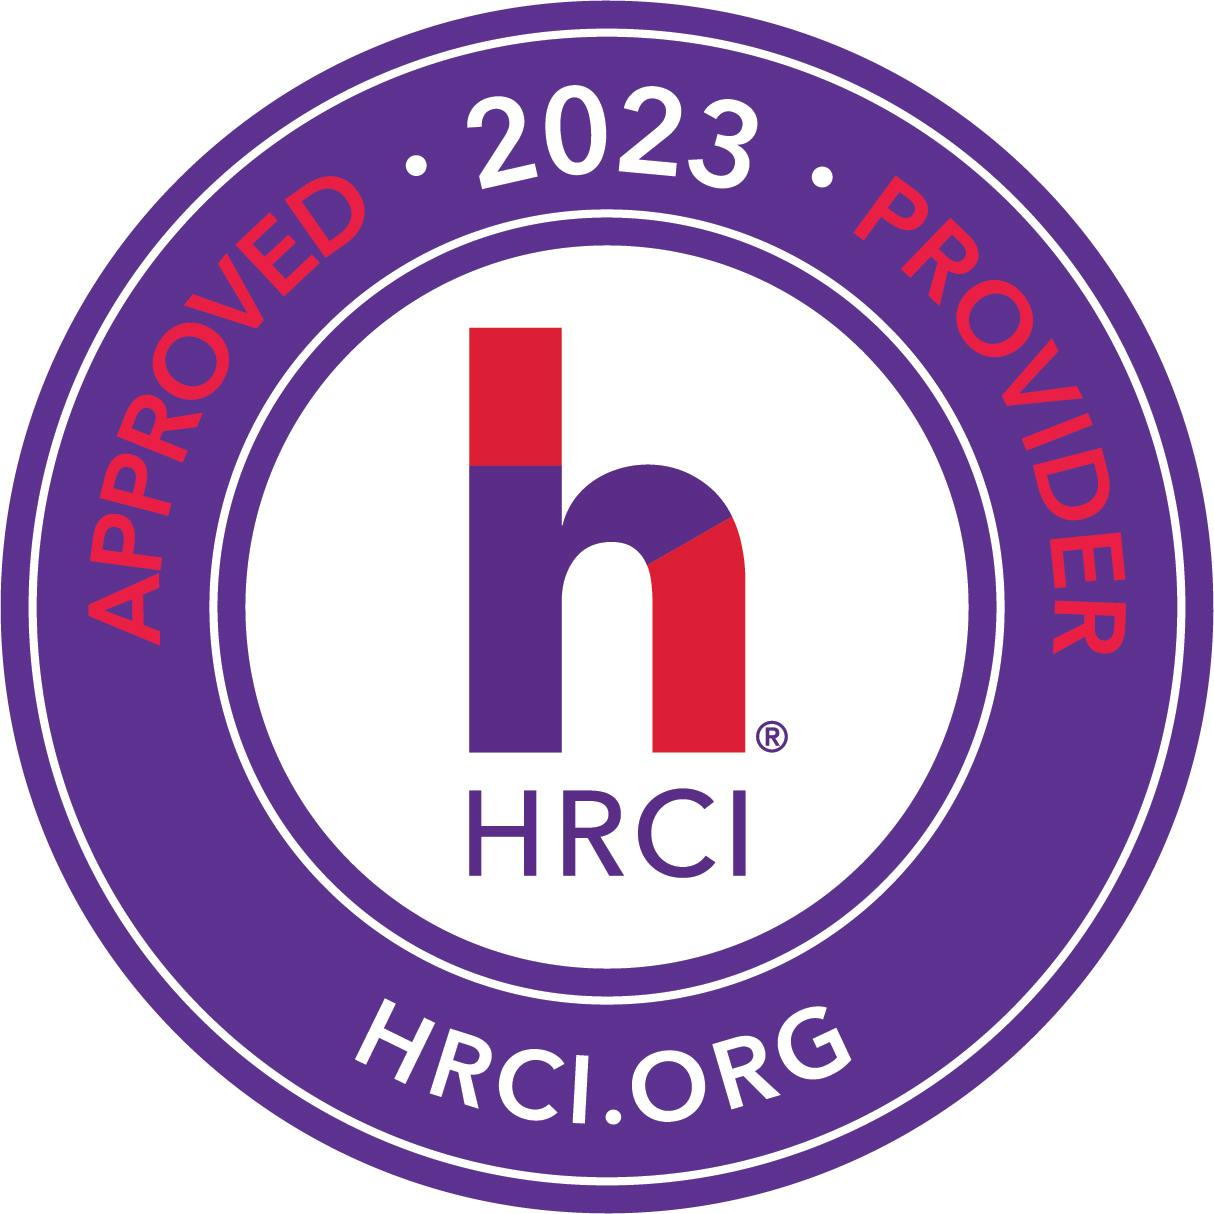 HRCI approved provider seal for 2023 Josh Bersin Academy